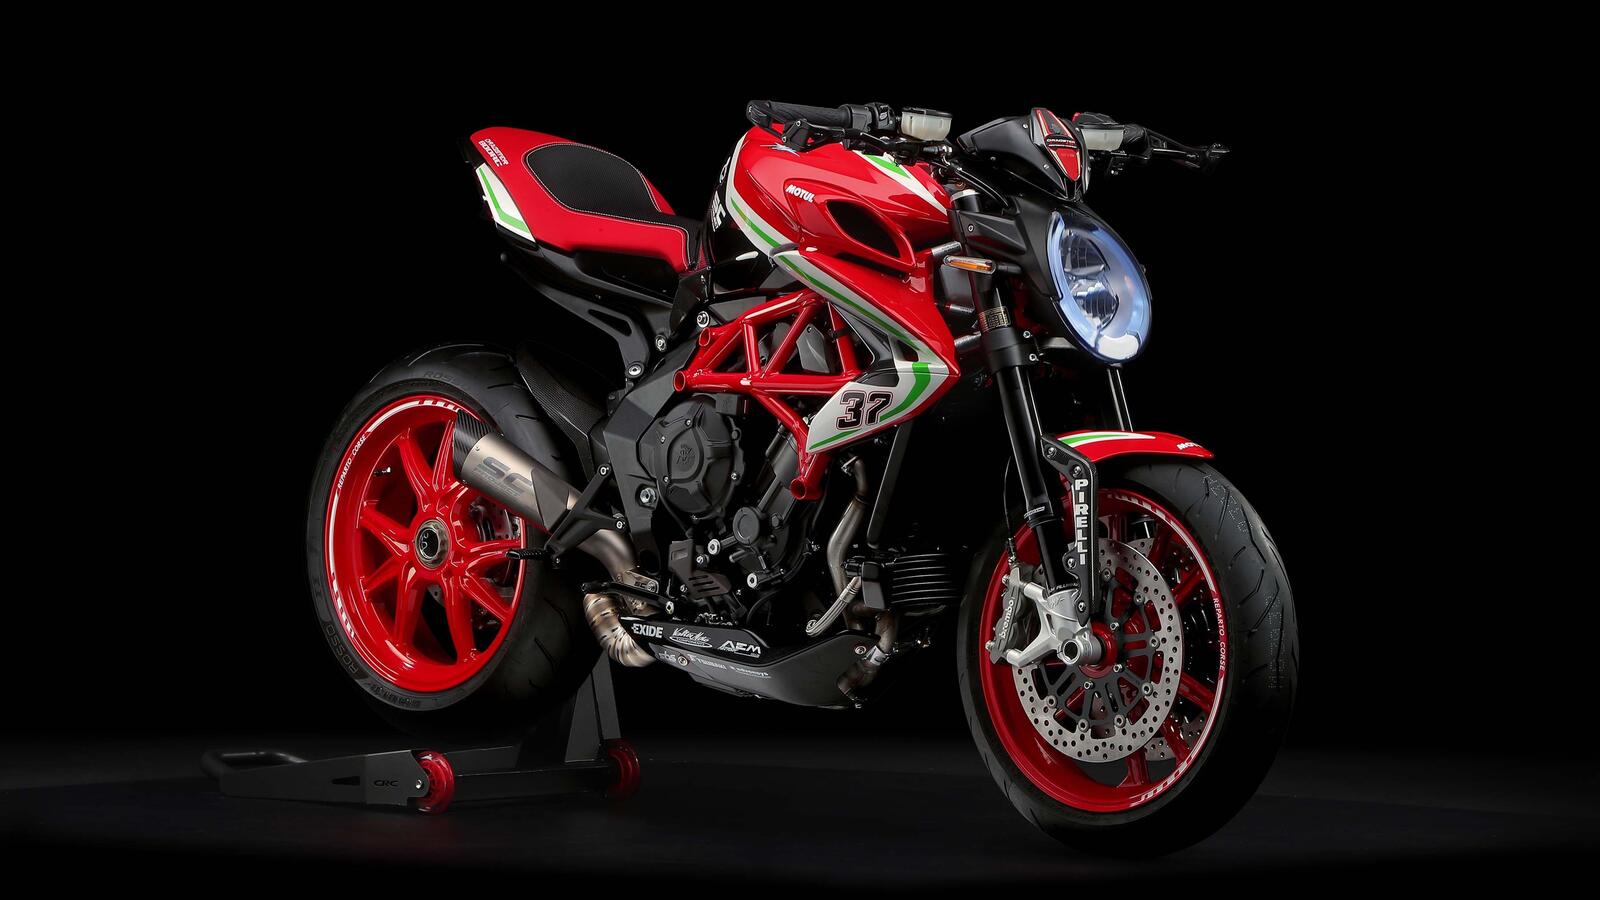 Wallpapers mv agusta dragster 800 rc red side view on the desktop